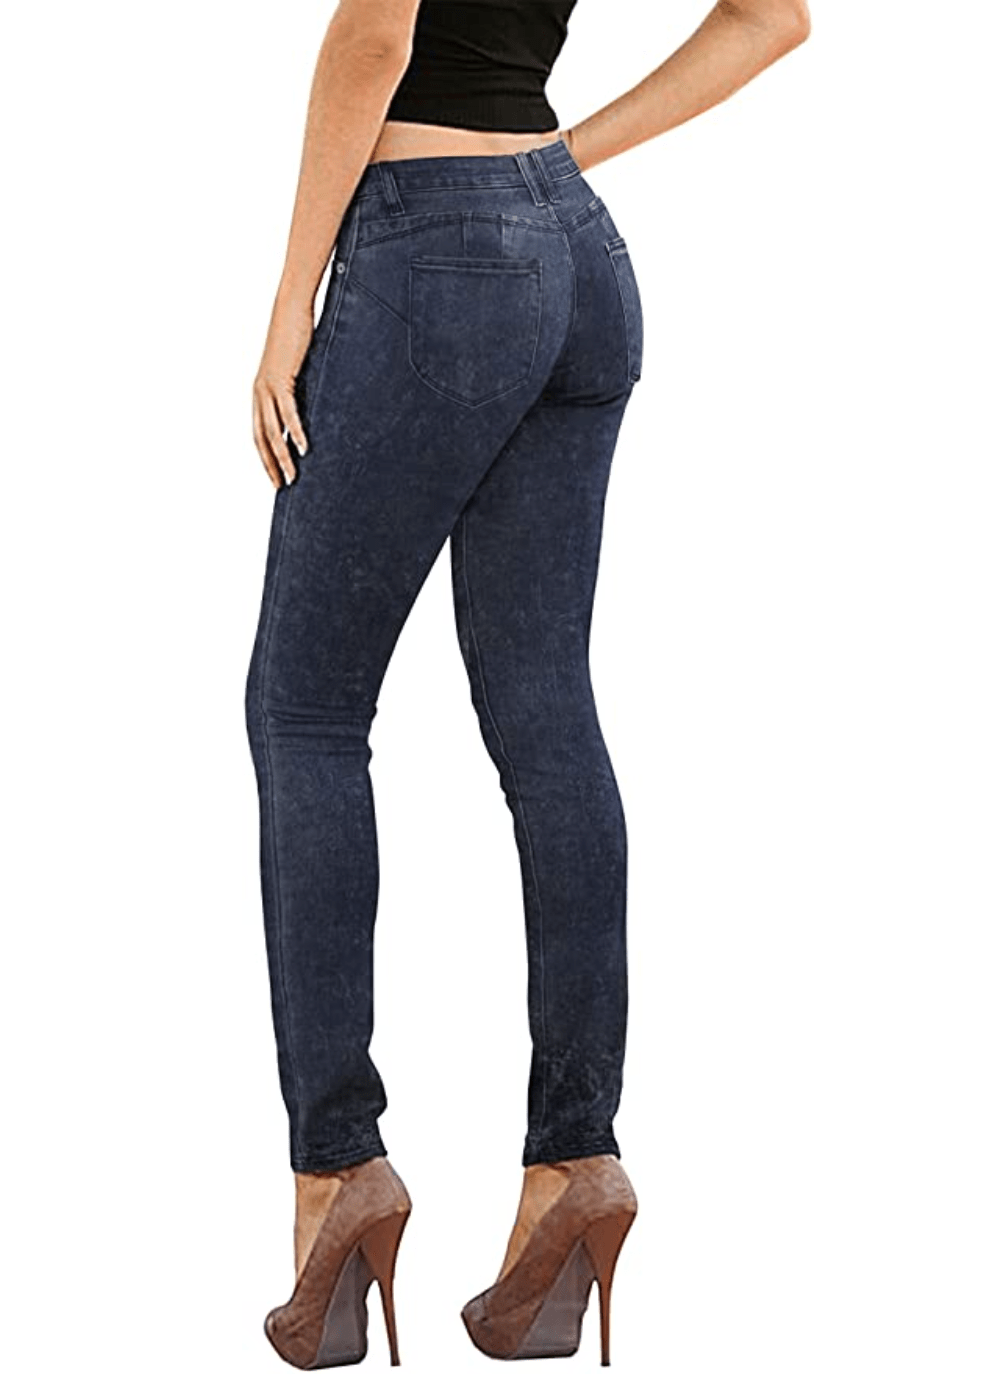  Women's Jeans High Waisted Butt-Lift Skinny Stretchy Soft Slim  Fit Distressed Comfy Classic Jeggings Denim Pants Blue : Sports & Outdoors